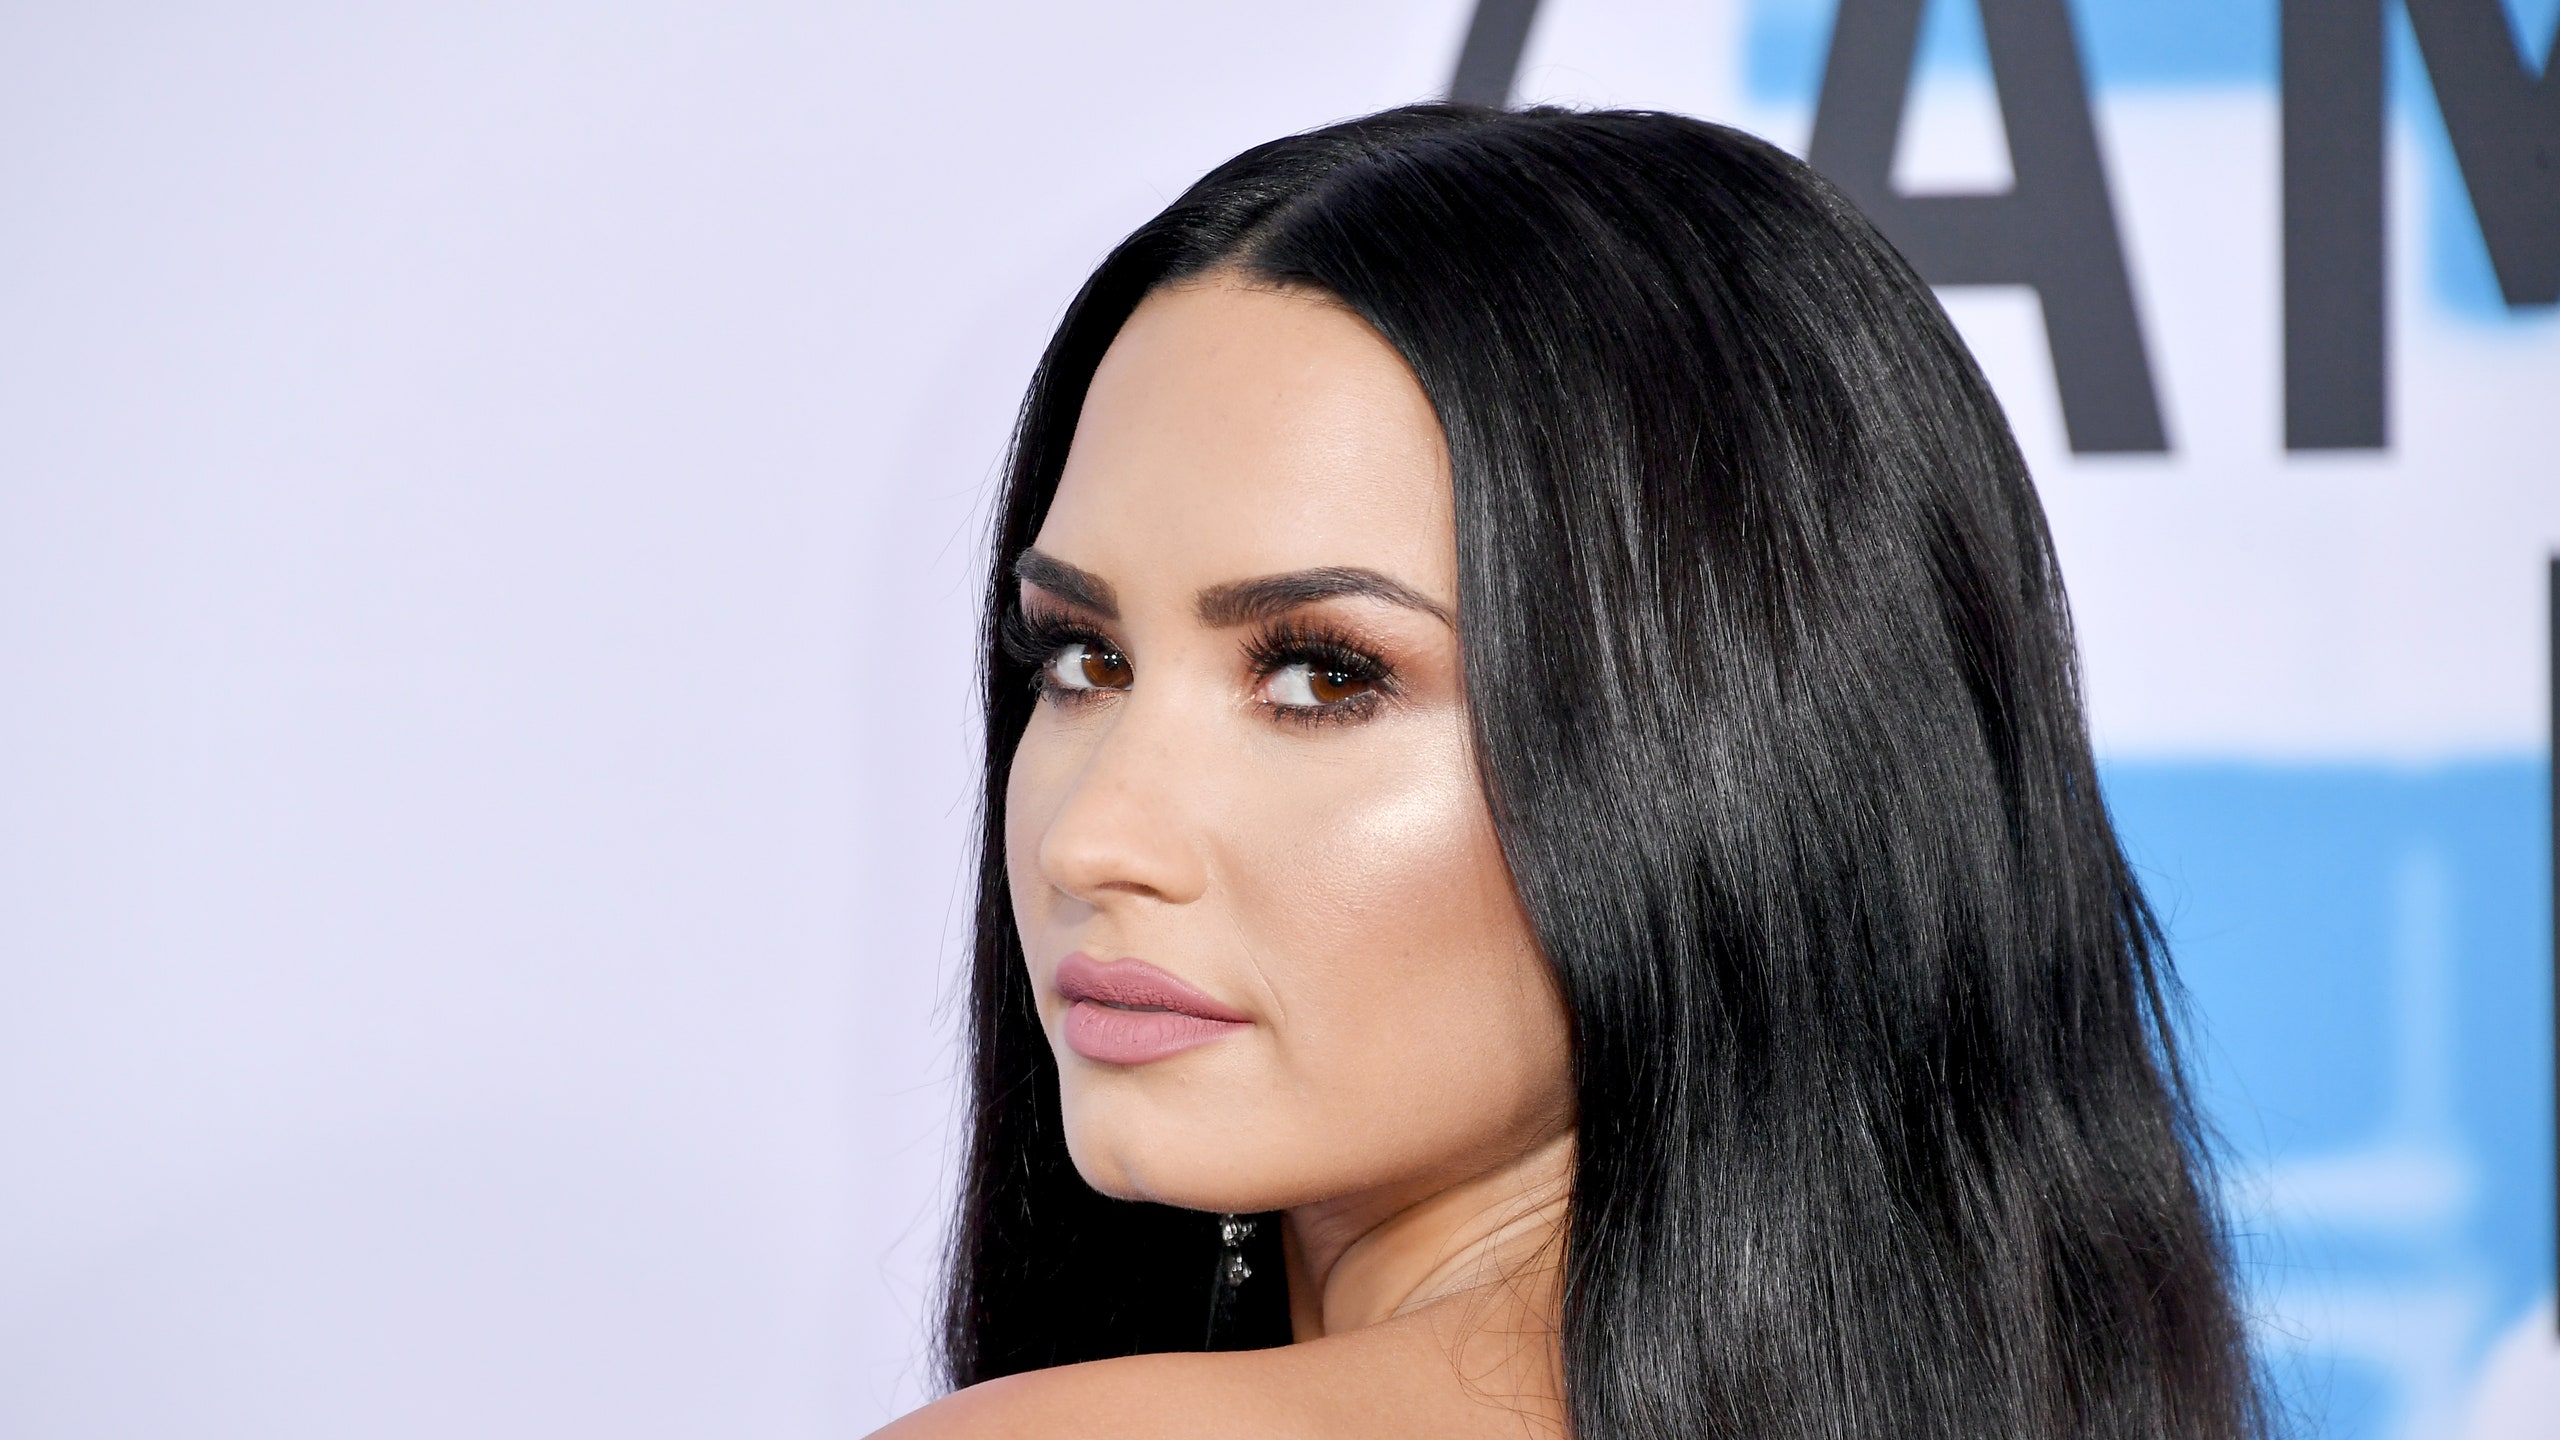 Demi Lovato to star in comedy pilot ordered by NBC